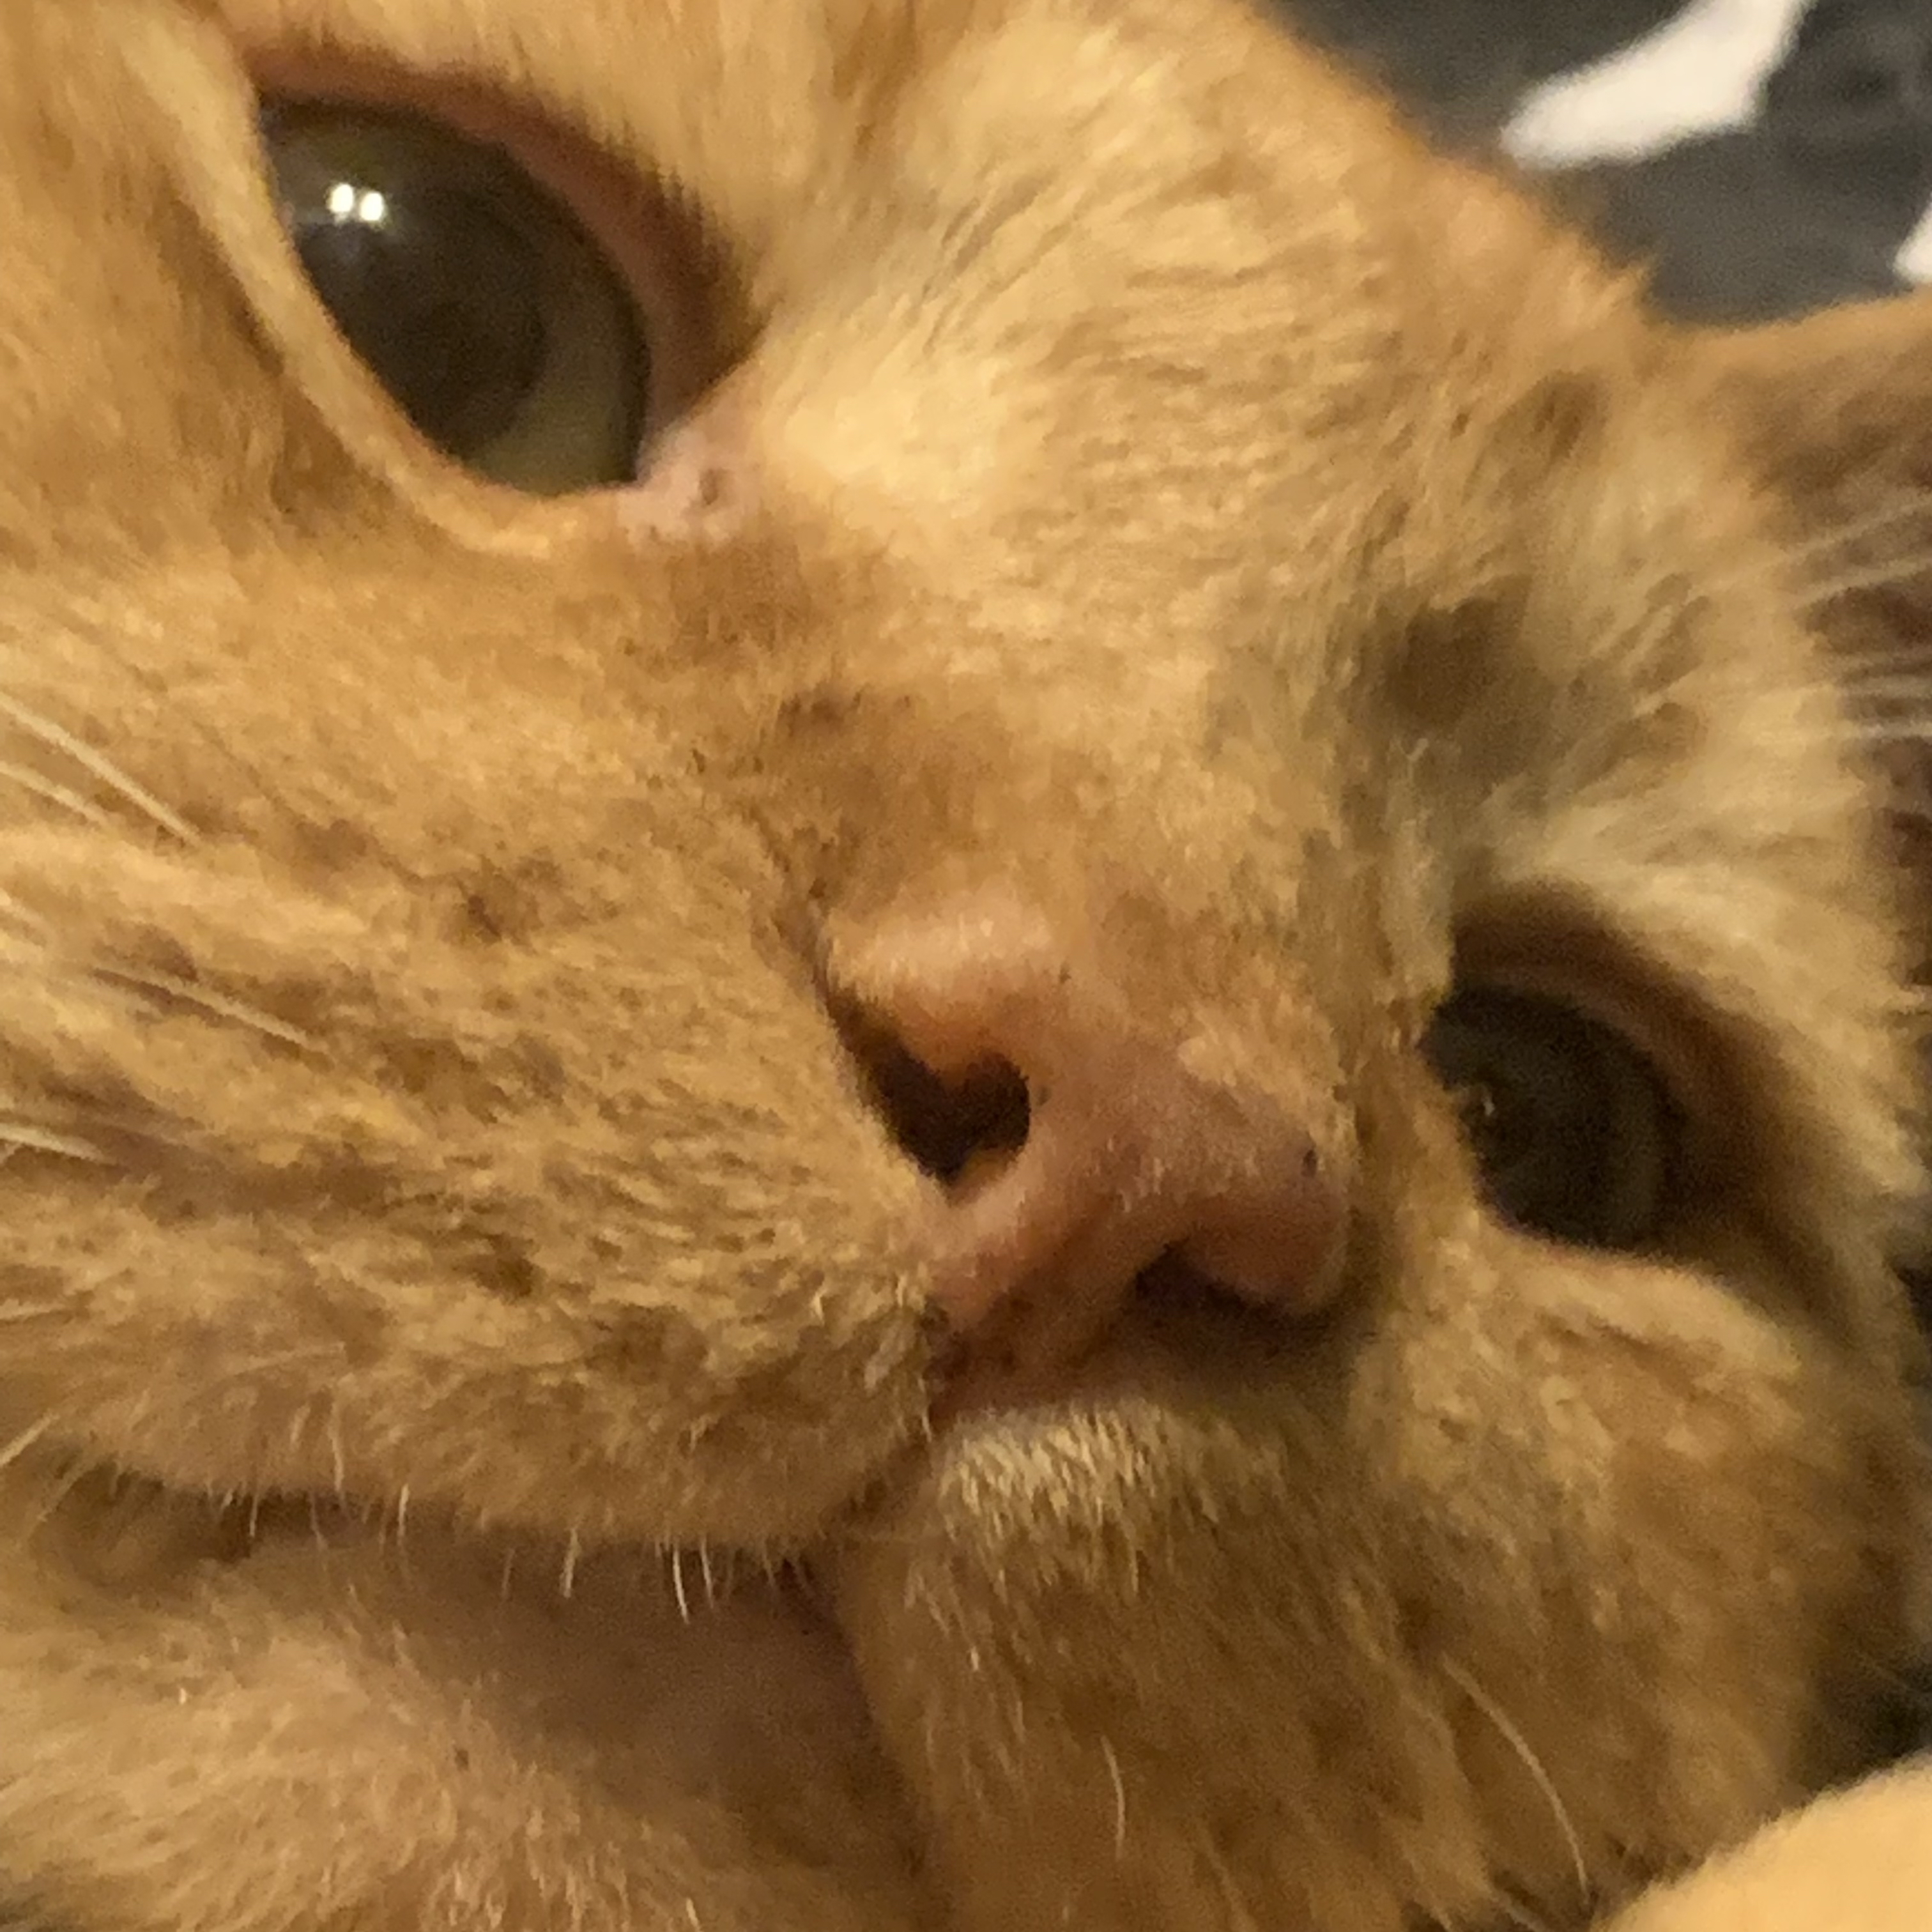 a very close-up picture of stanley's face from a slightly low angle. he looks cross-eyed at the camera and you can see one of his pointy teeth sticking out from under his lip